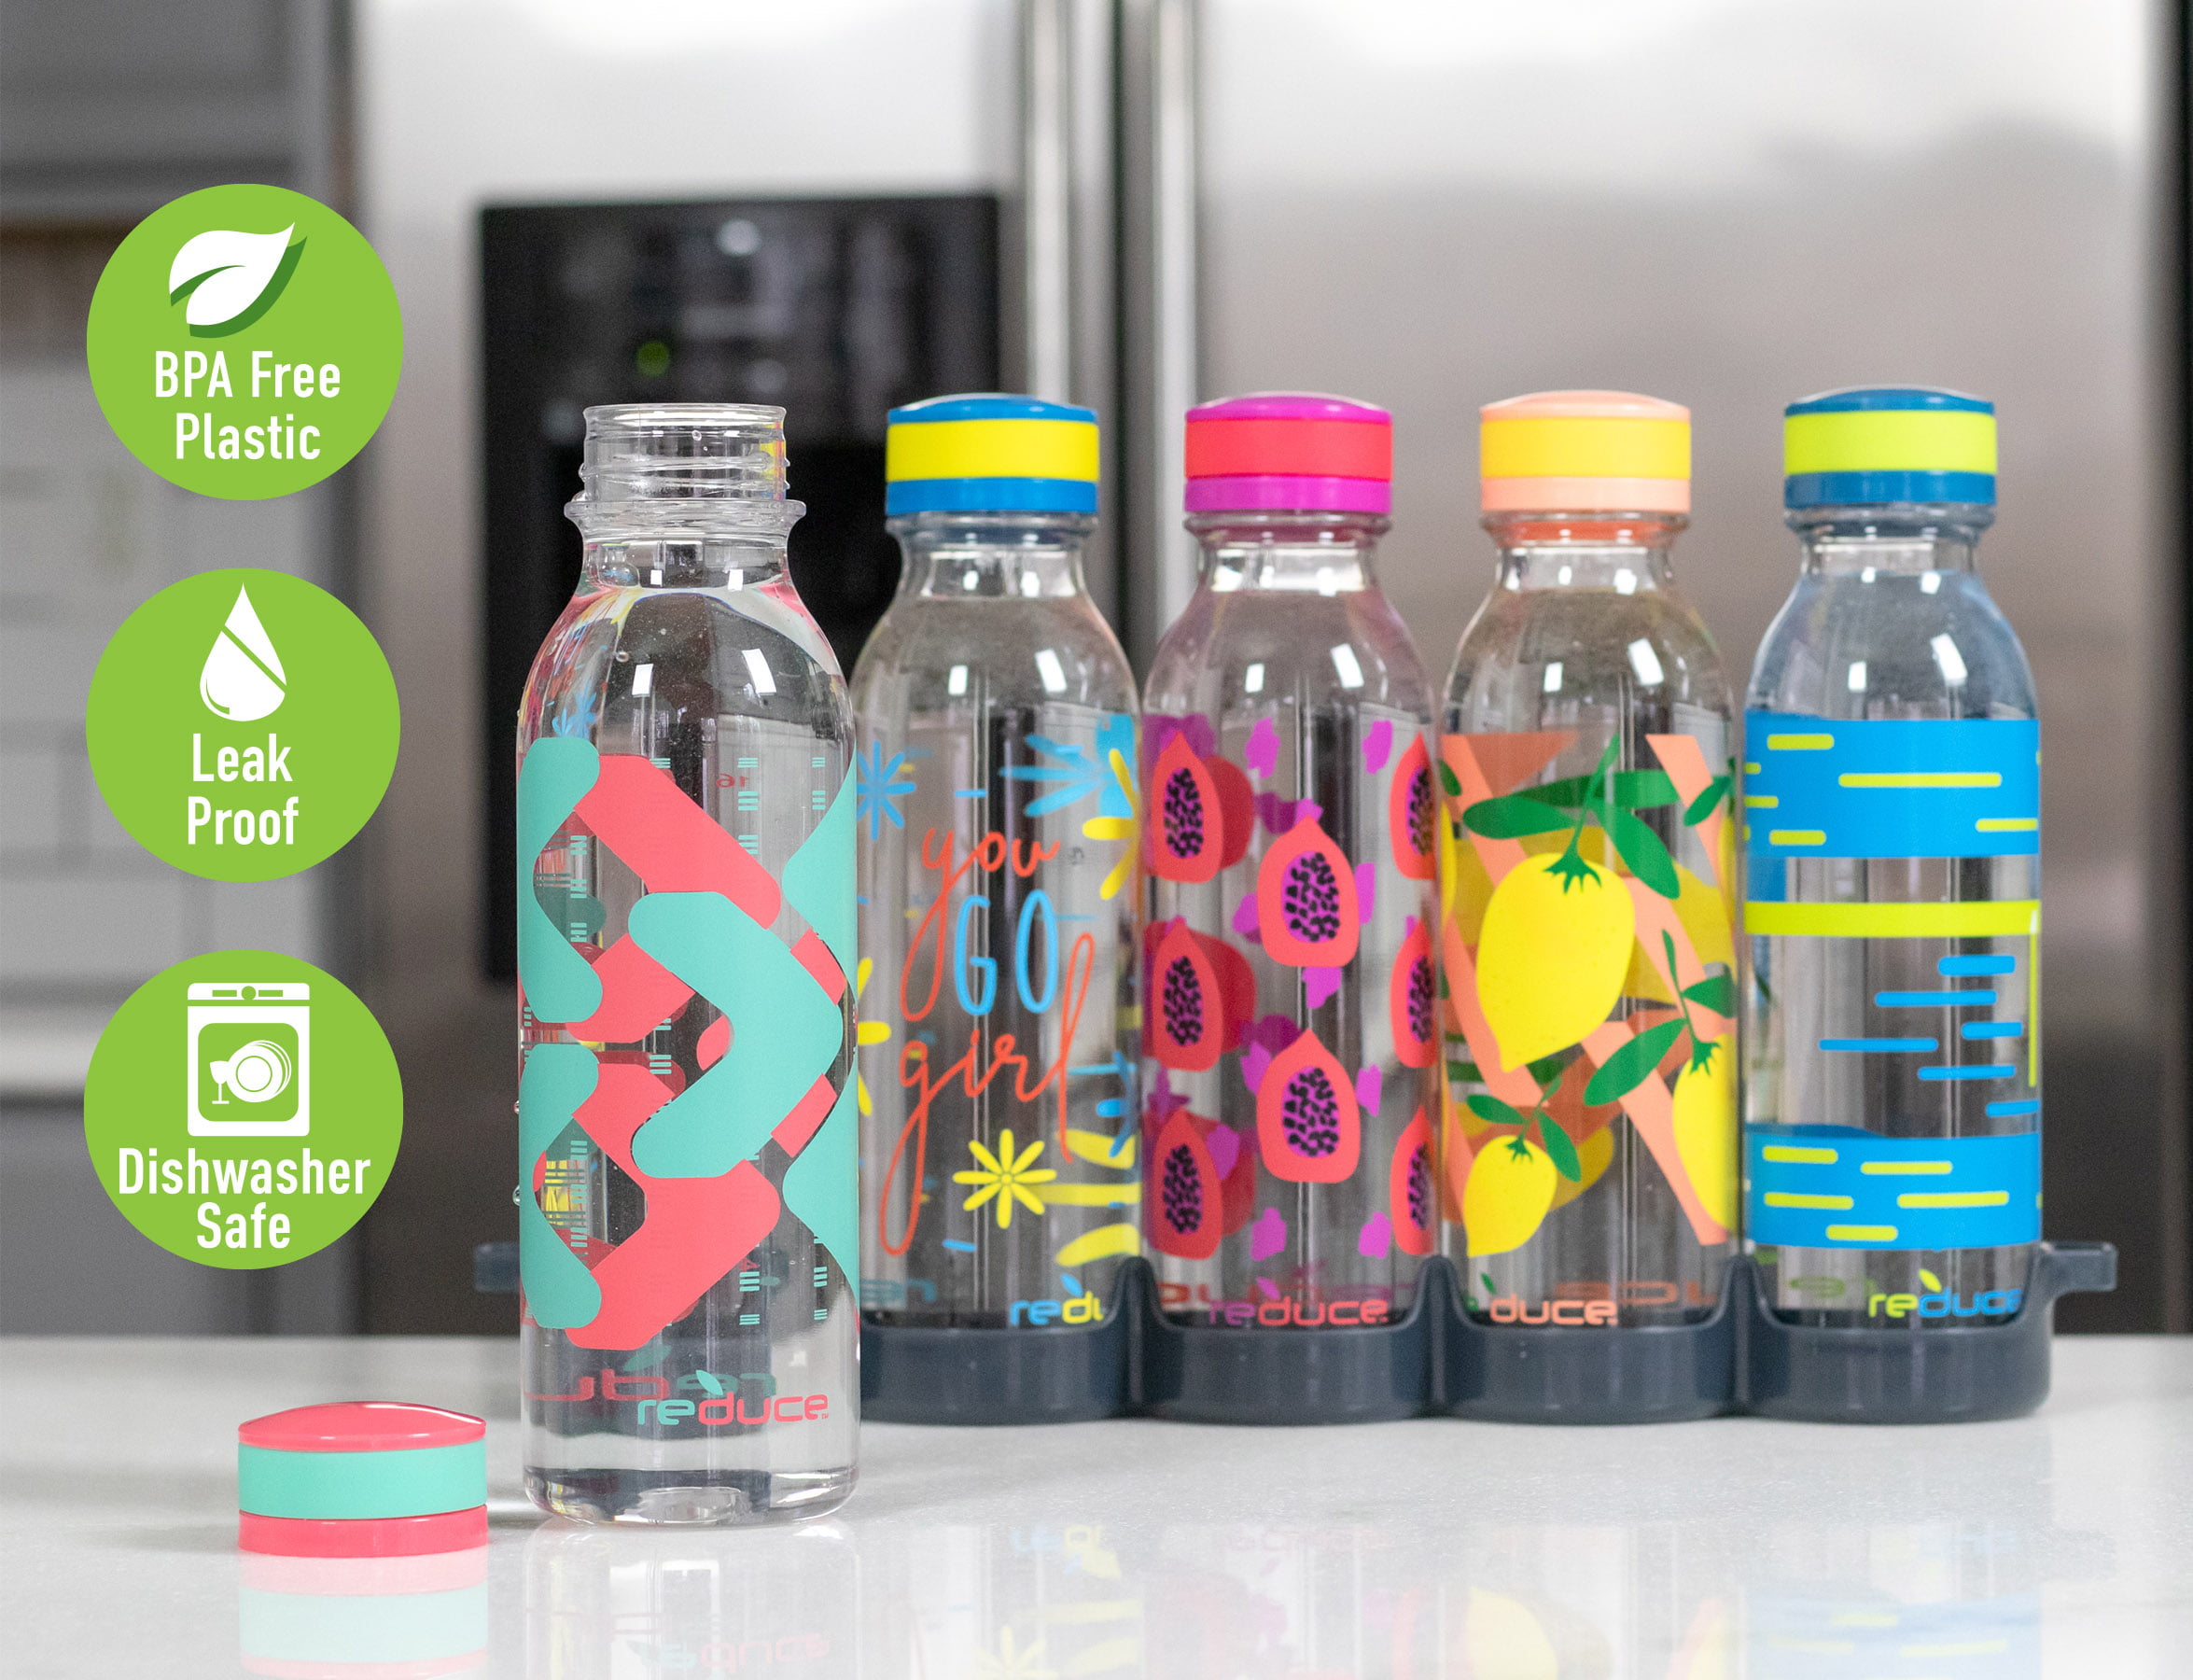 Bring a Reusable Water Bottle - Day 3 of the Zero Waste Challenge